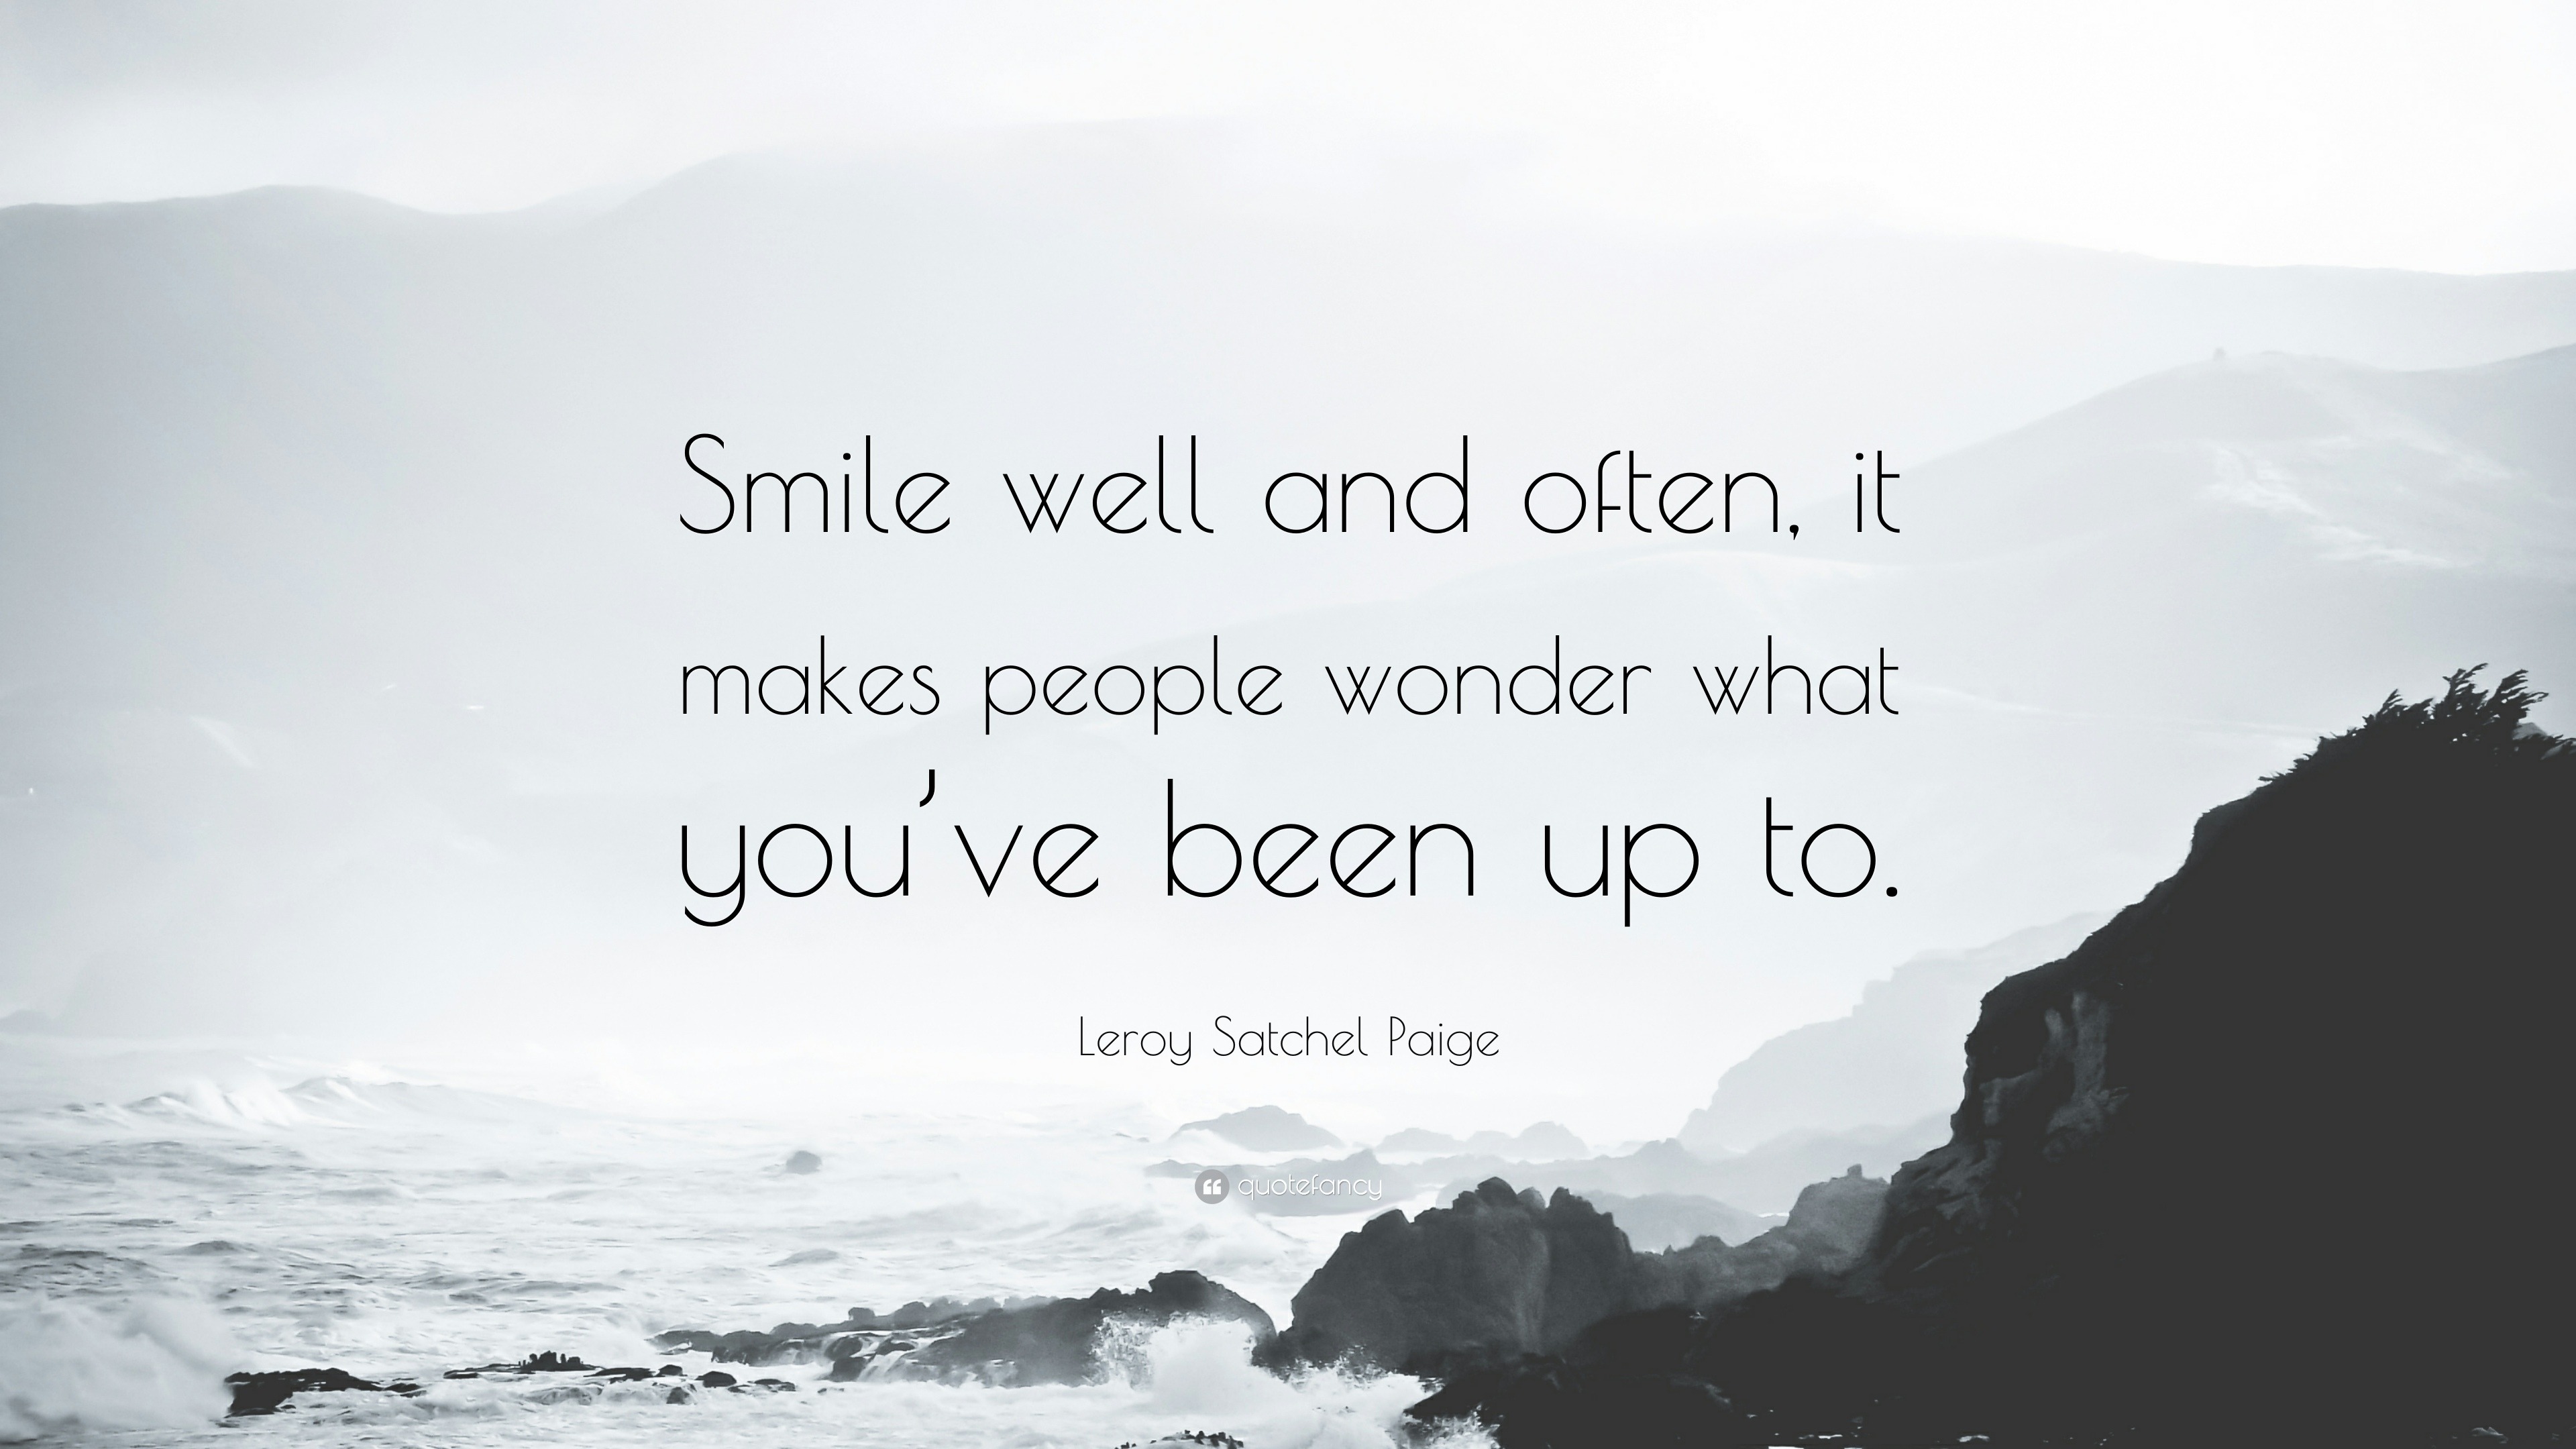 Leroy Satchel Paige Quote: “Smile well and often, it makes people